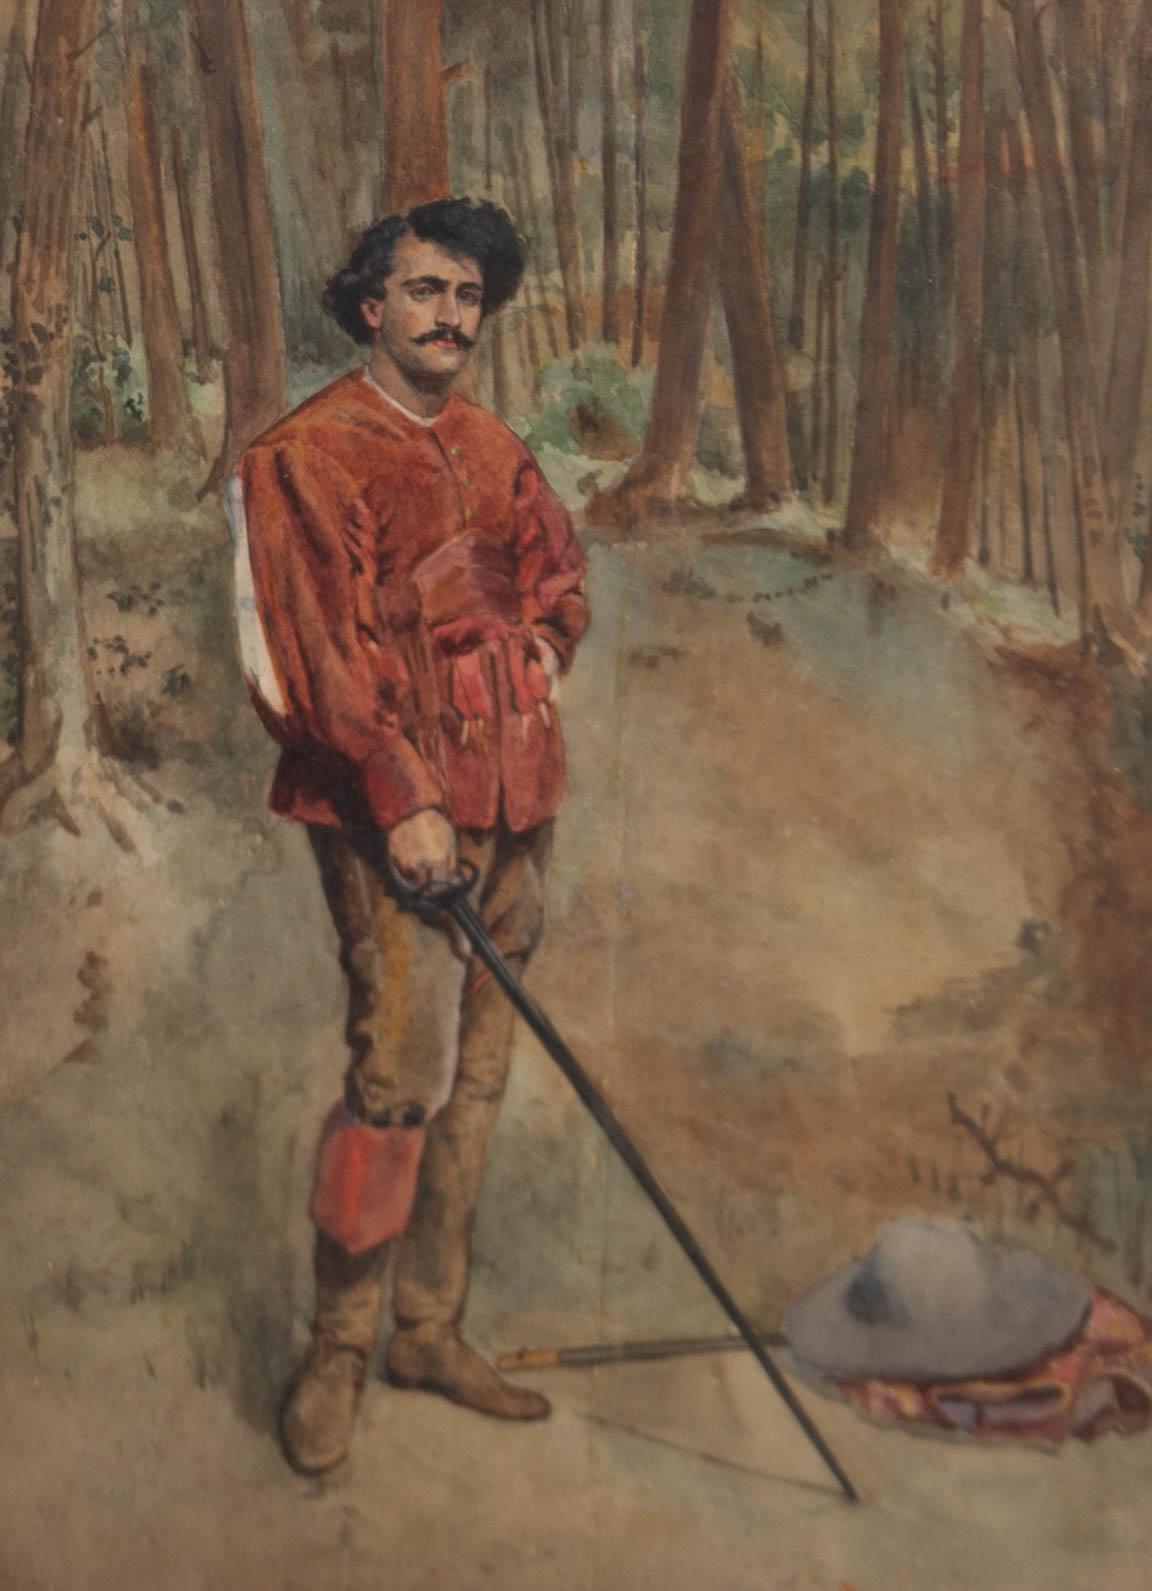 A very fine and detailed portrait of a young man standing alone in a wooded landscape. He is dressed in a red jacket and holds a large sword, his hat and other items of clothing lay beside him on the ground. The artist has wonderfully captured this